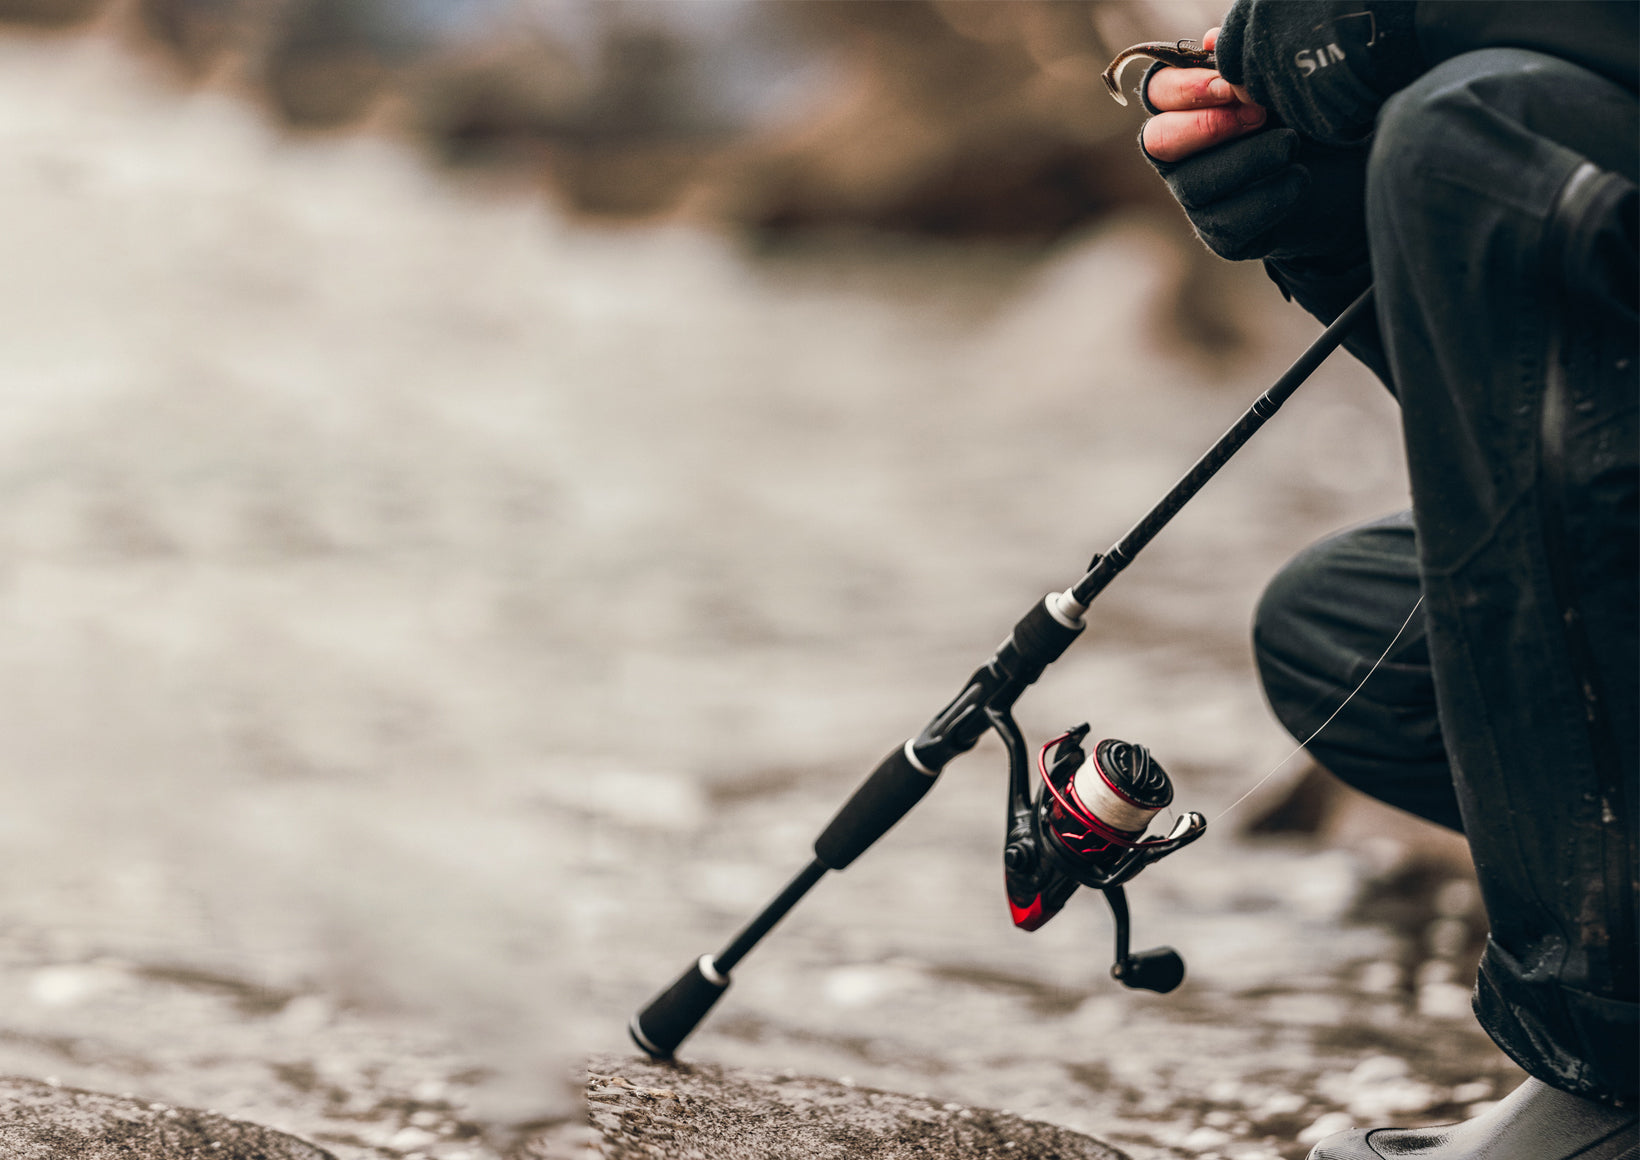 What reel and rod combo are you using the most? : r/Fishing